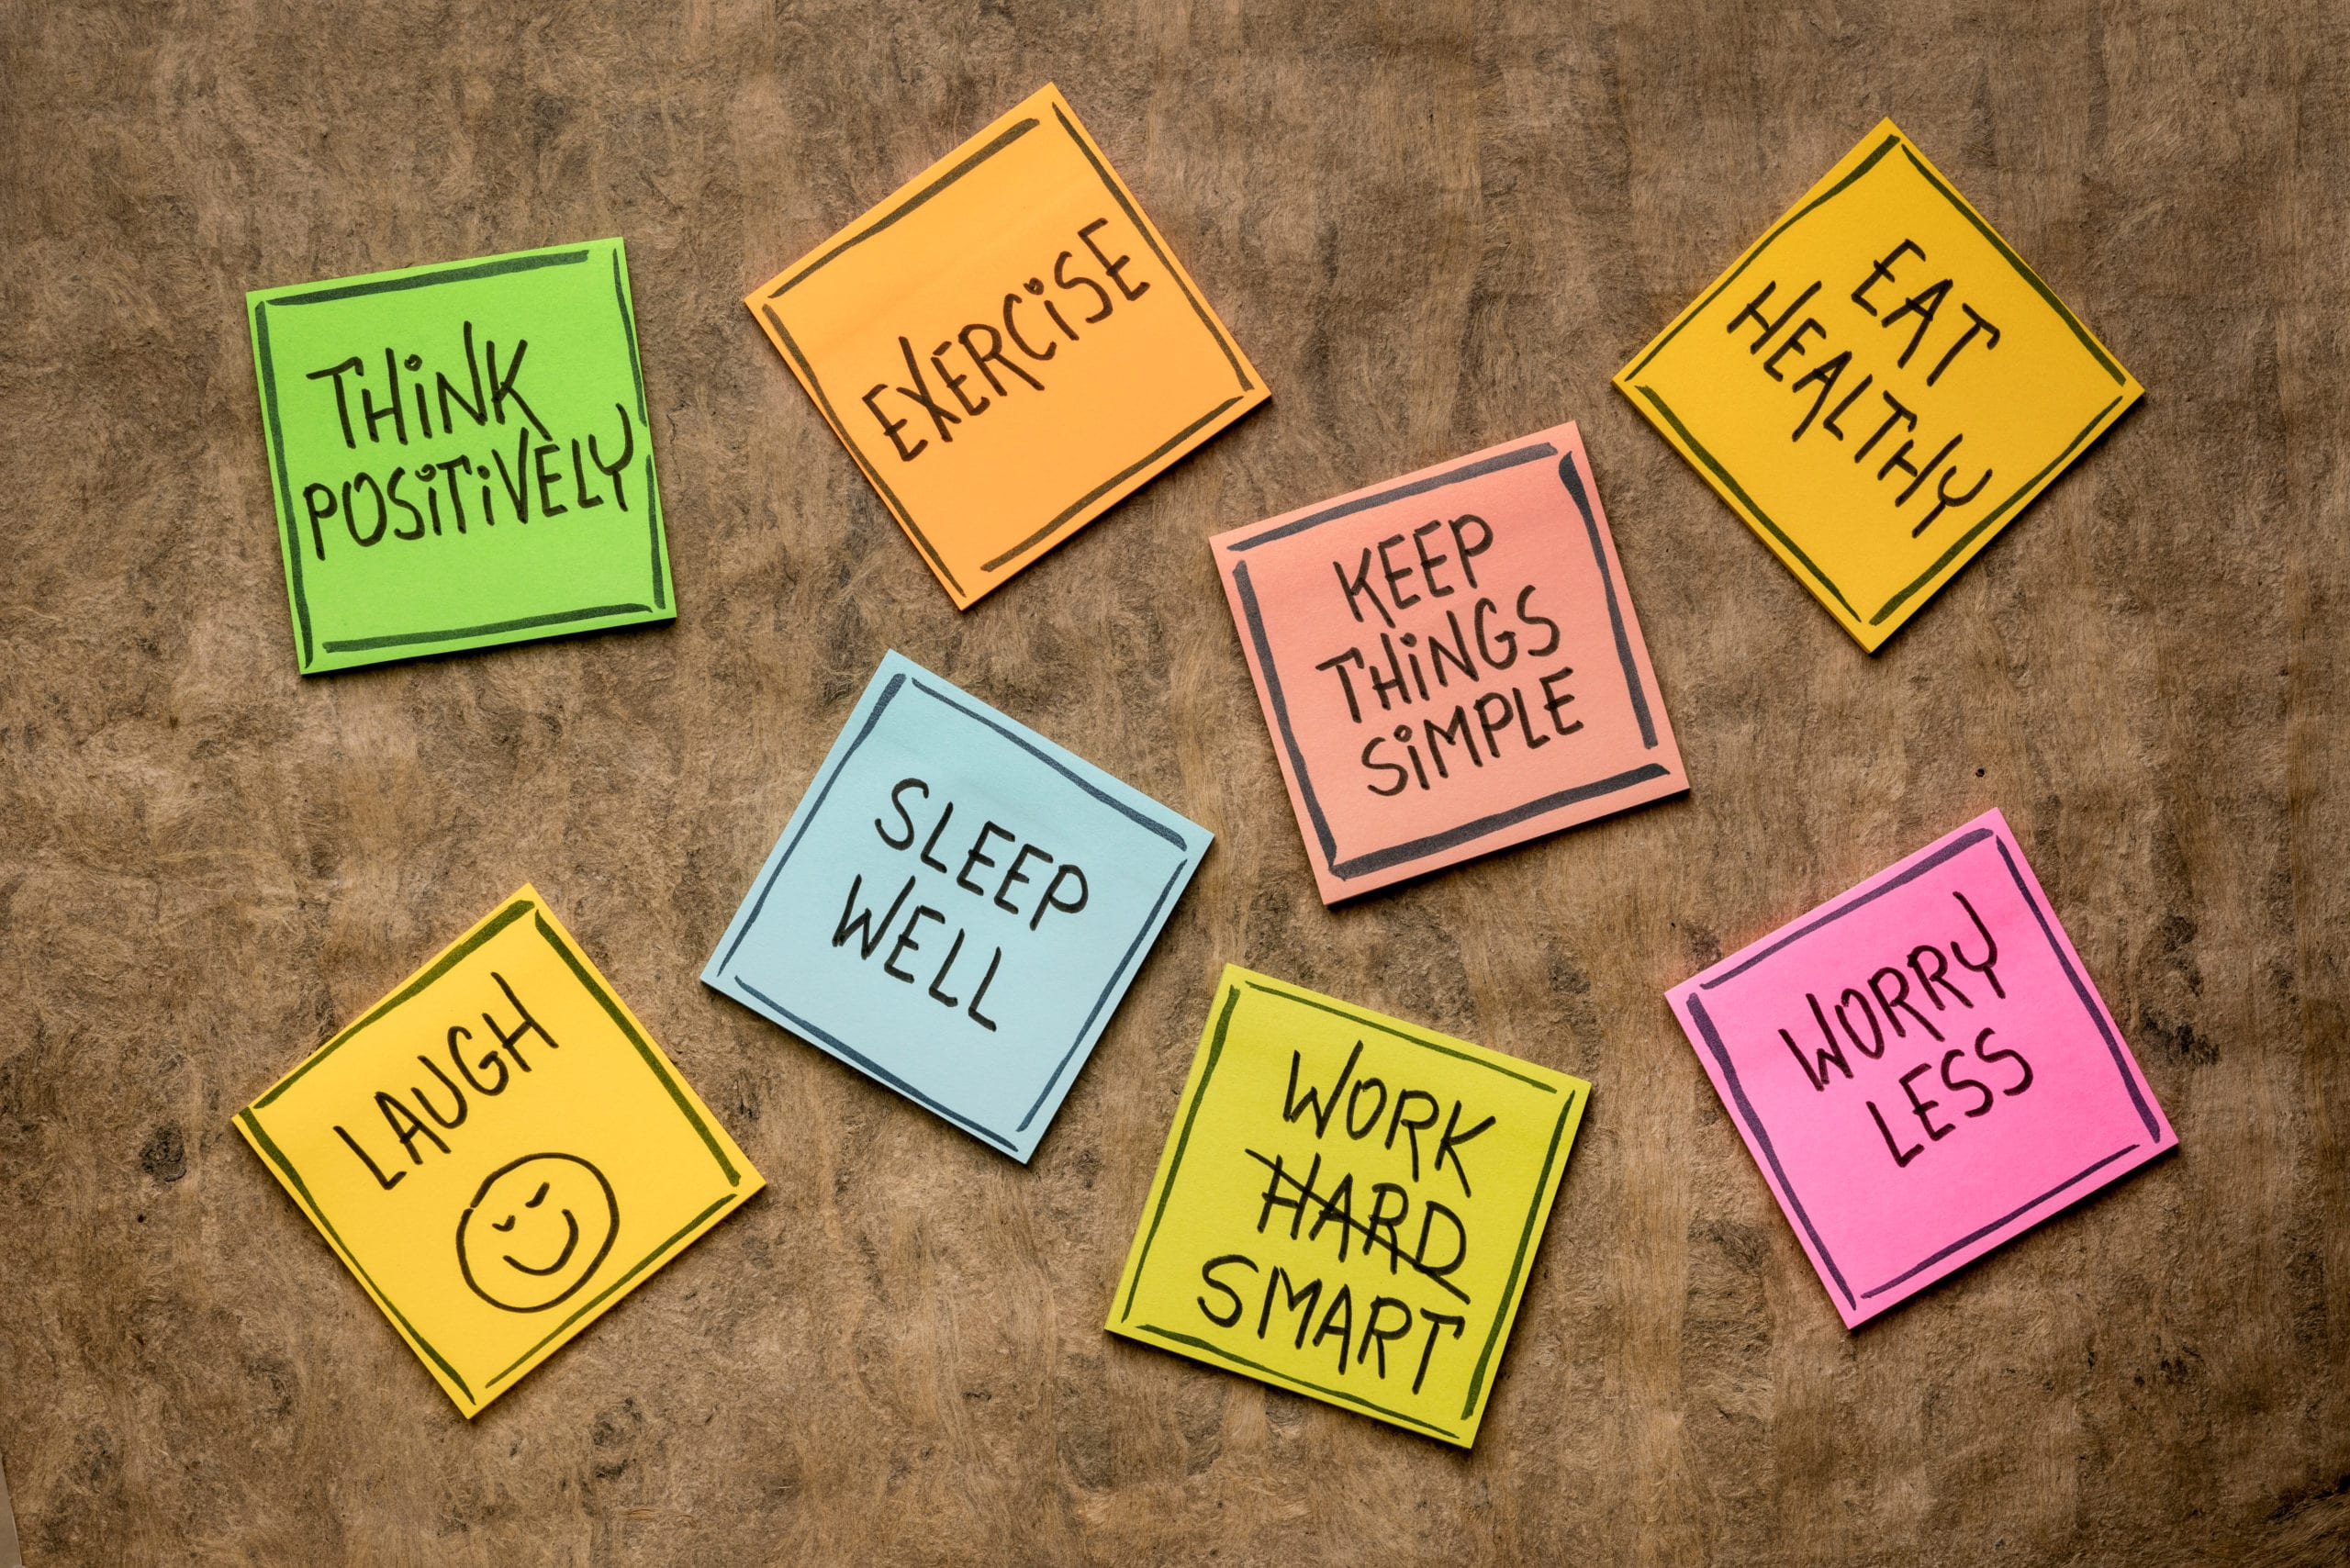 Think Positively, Excercise, Eat healthy, Laugh, Sleep well, Work smart, Work less, Keep things simple